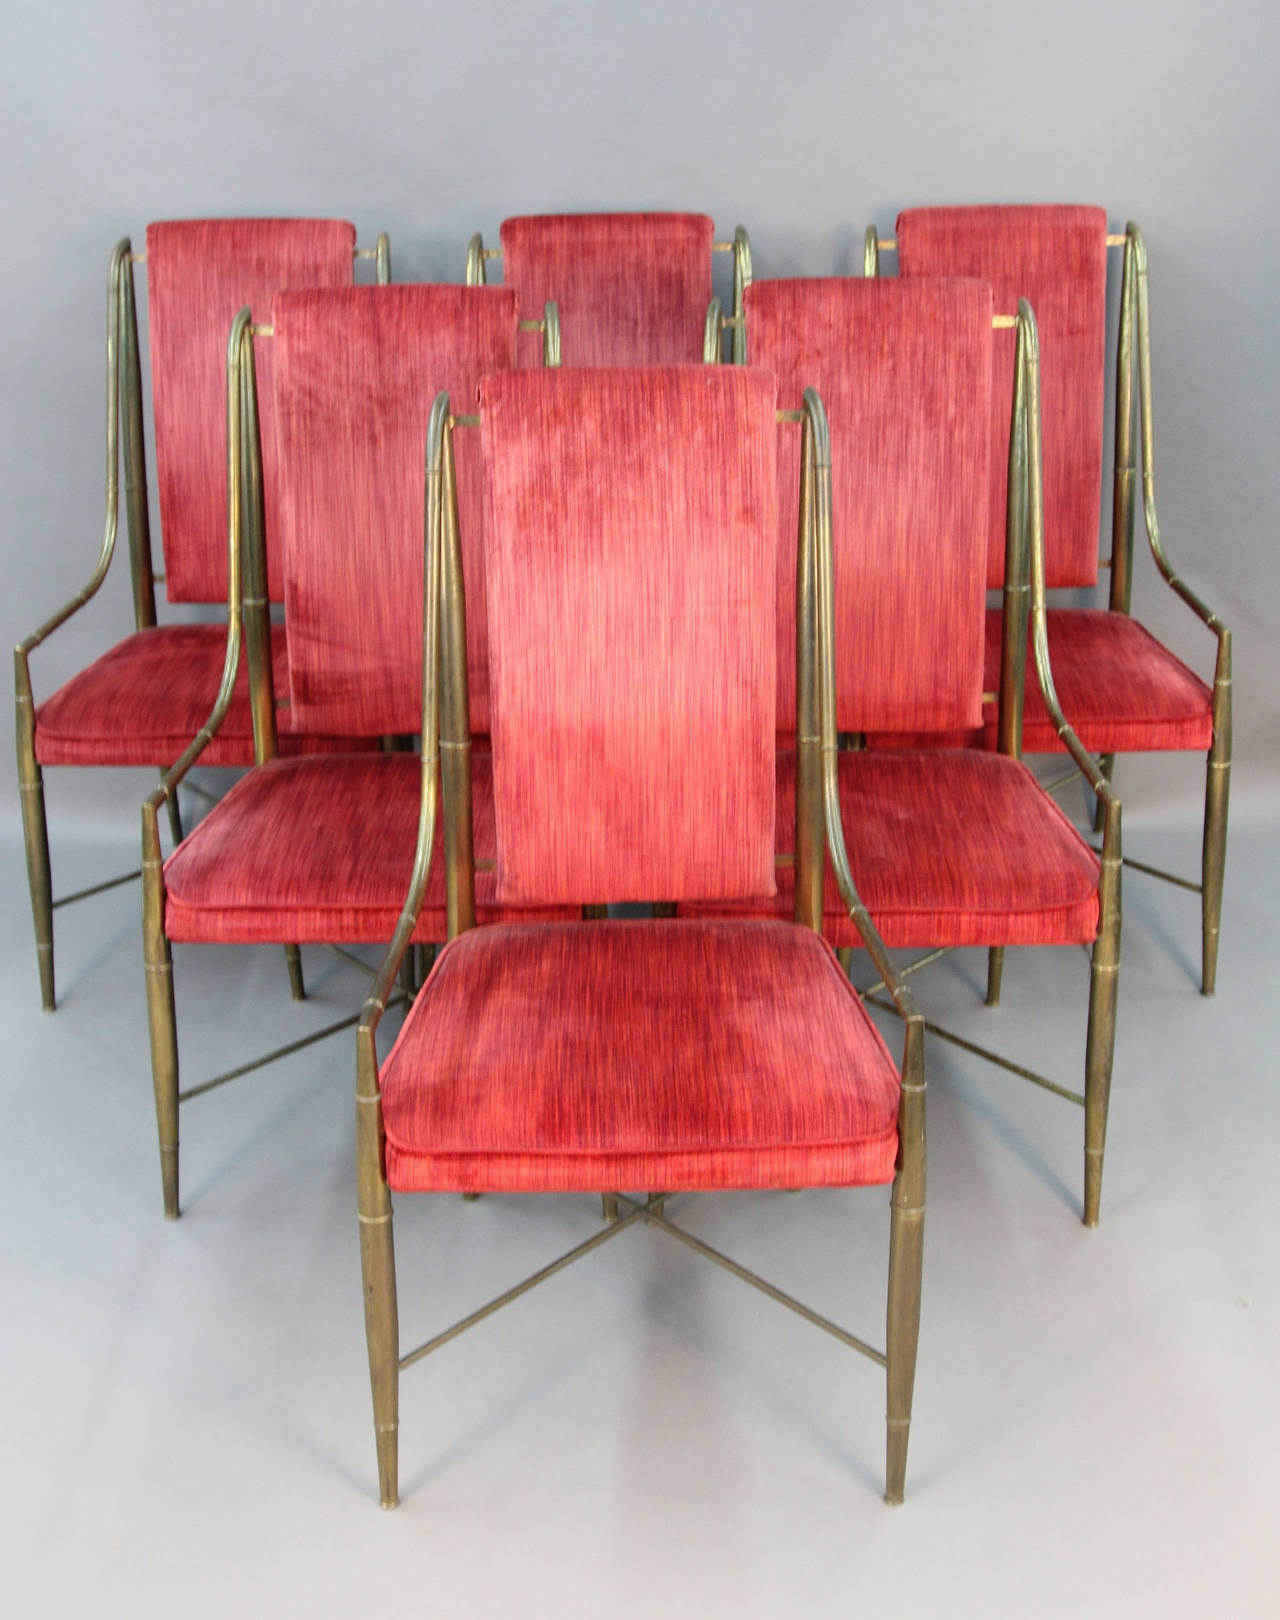 Beautiful set of six brass master craft dining chairs with velvet upholstery. Faux bamboo brass frame. Frame shows nice vintage patina, but solid brass can be polished to look new. Upholstery in good shape.